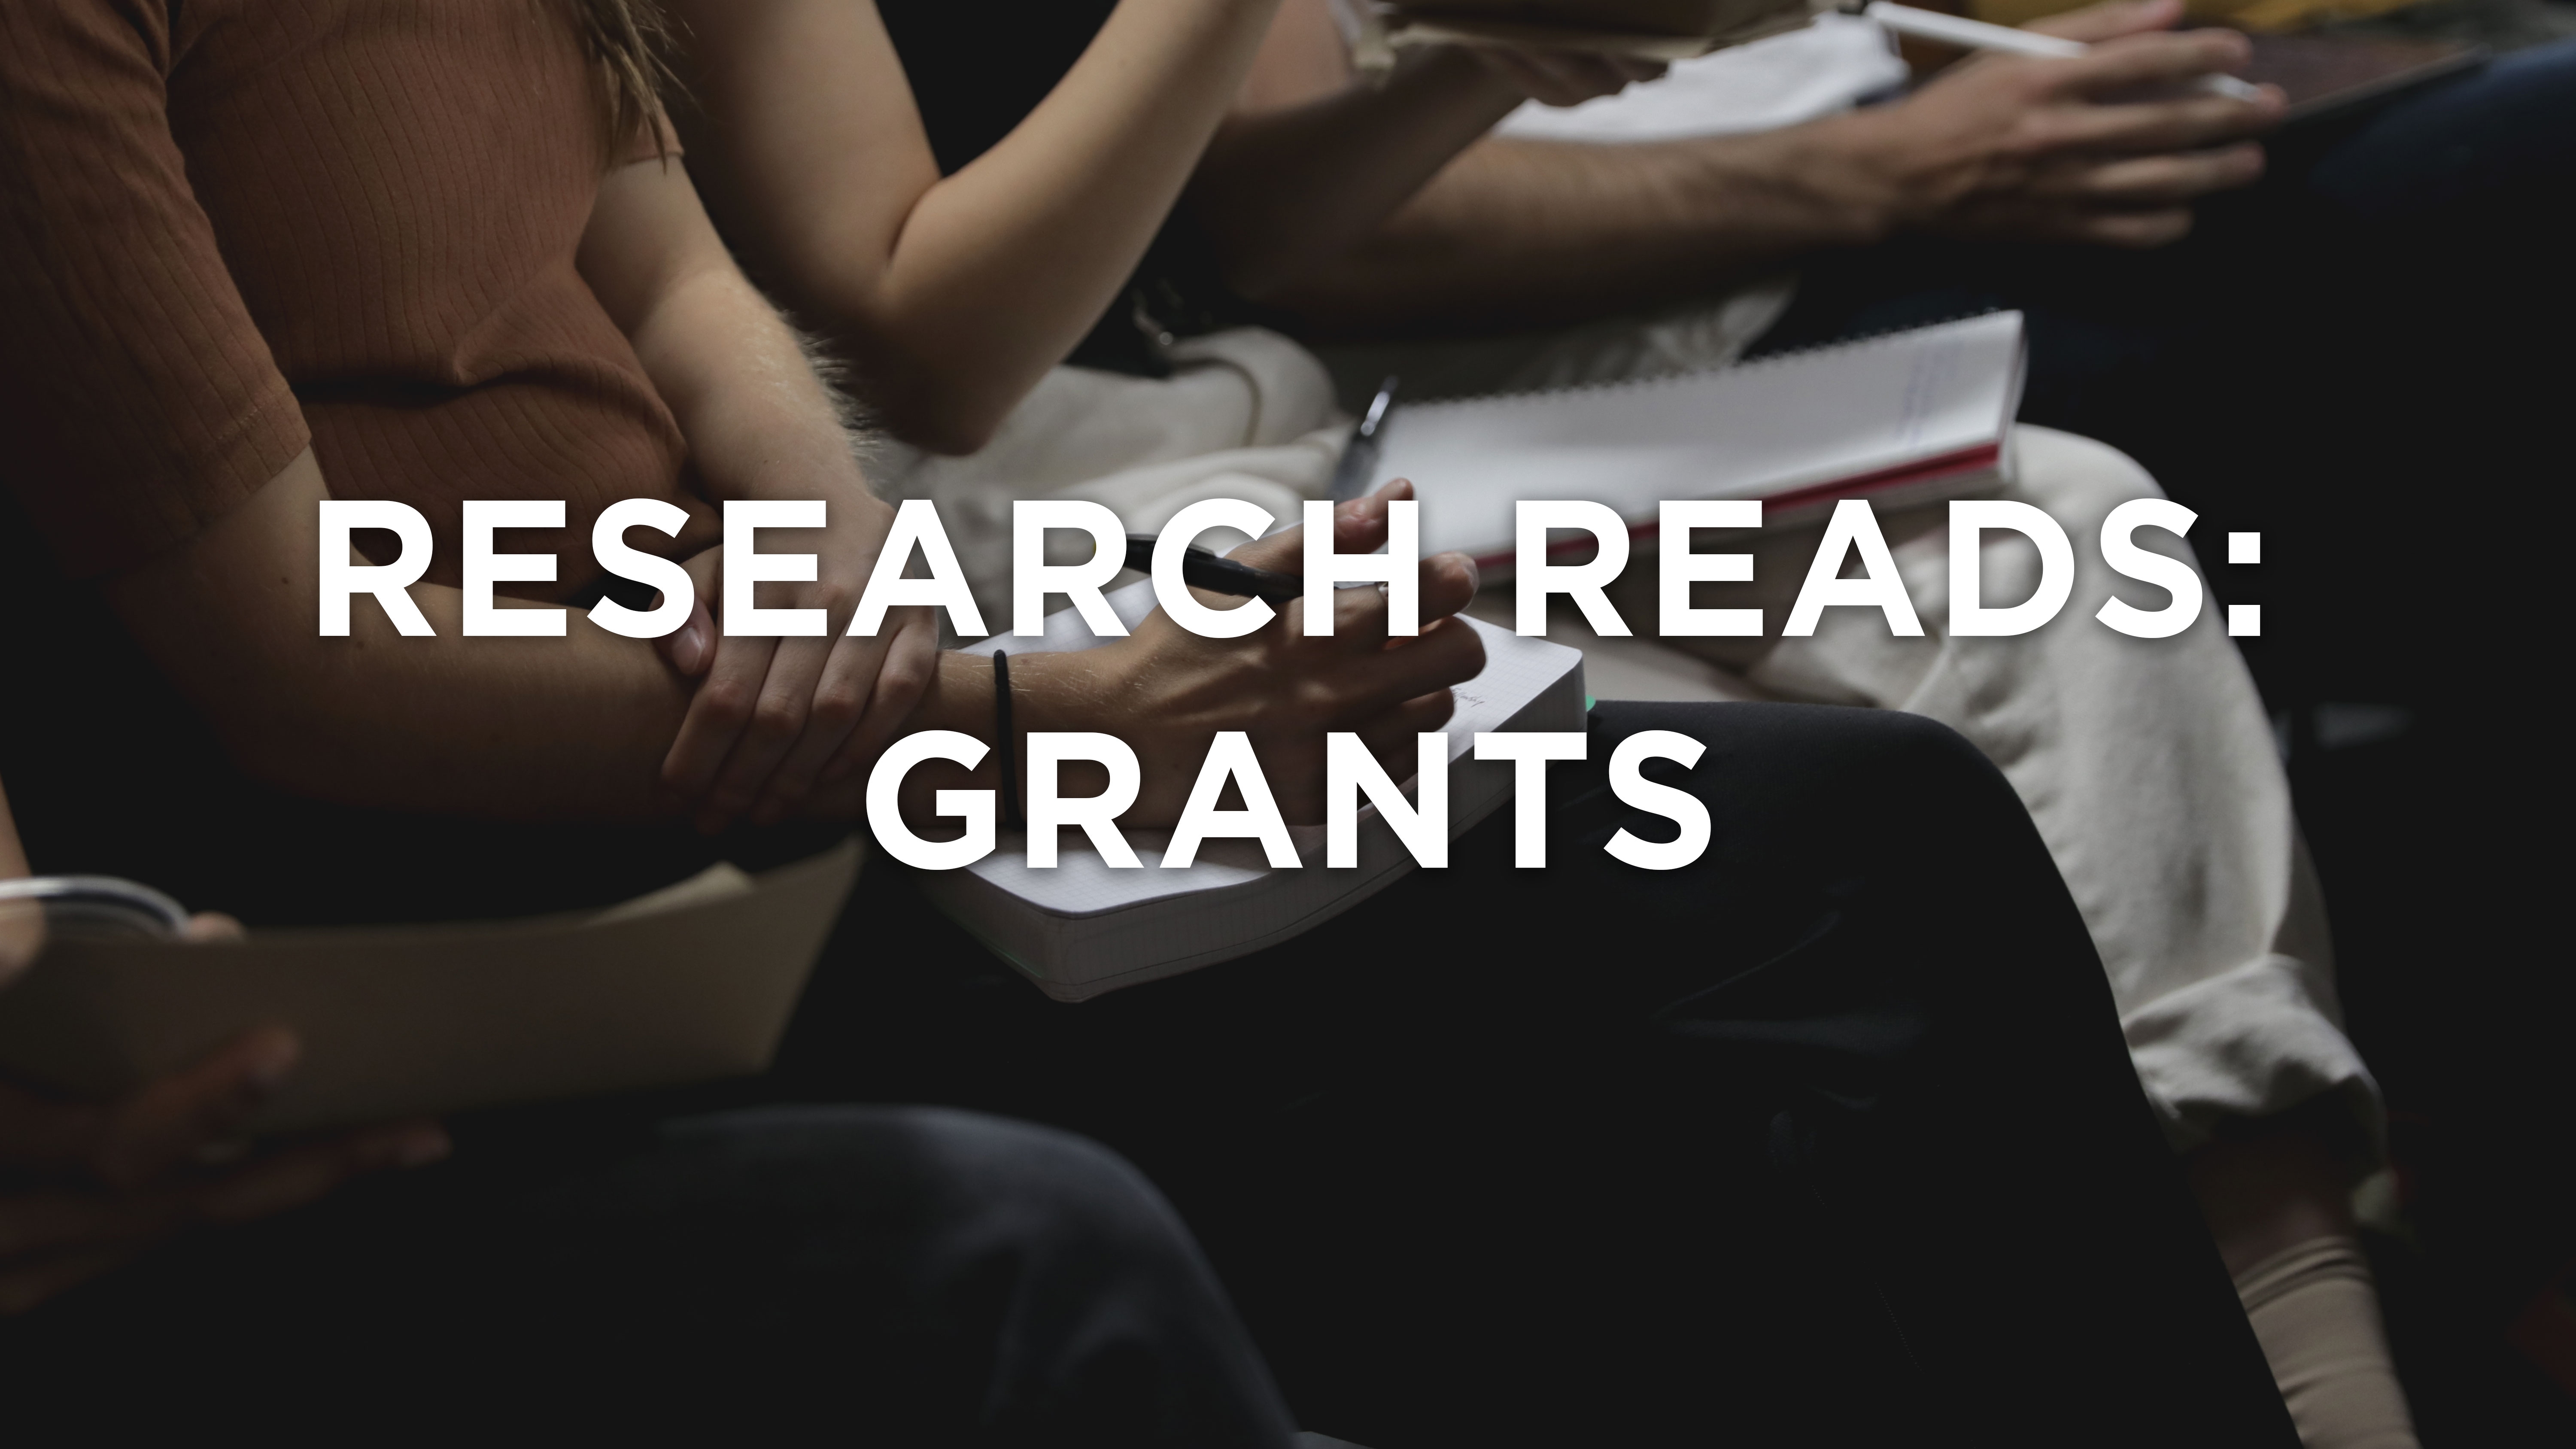 Research Reads: Grants